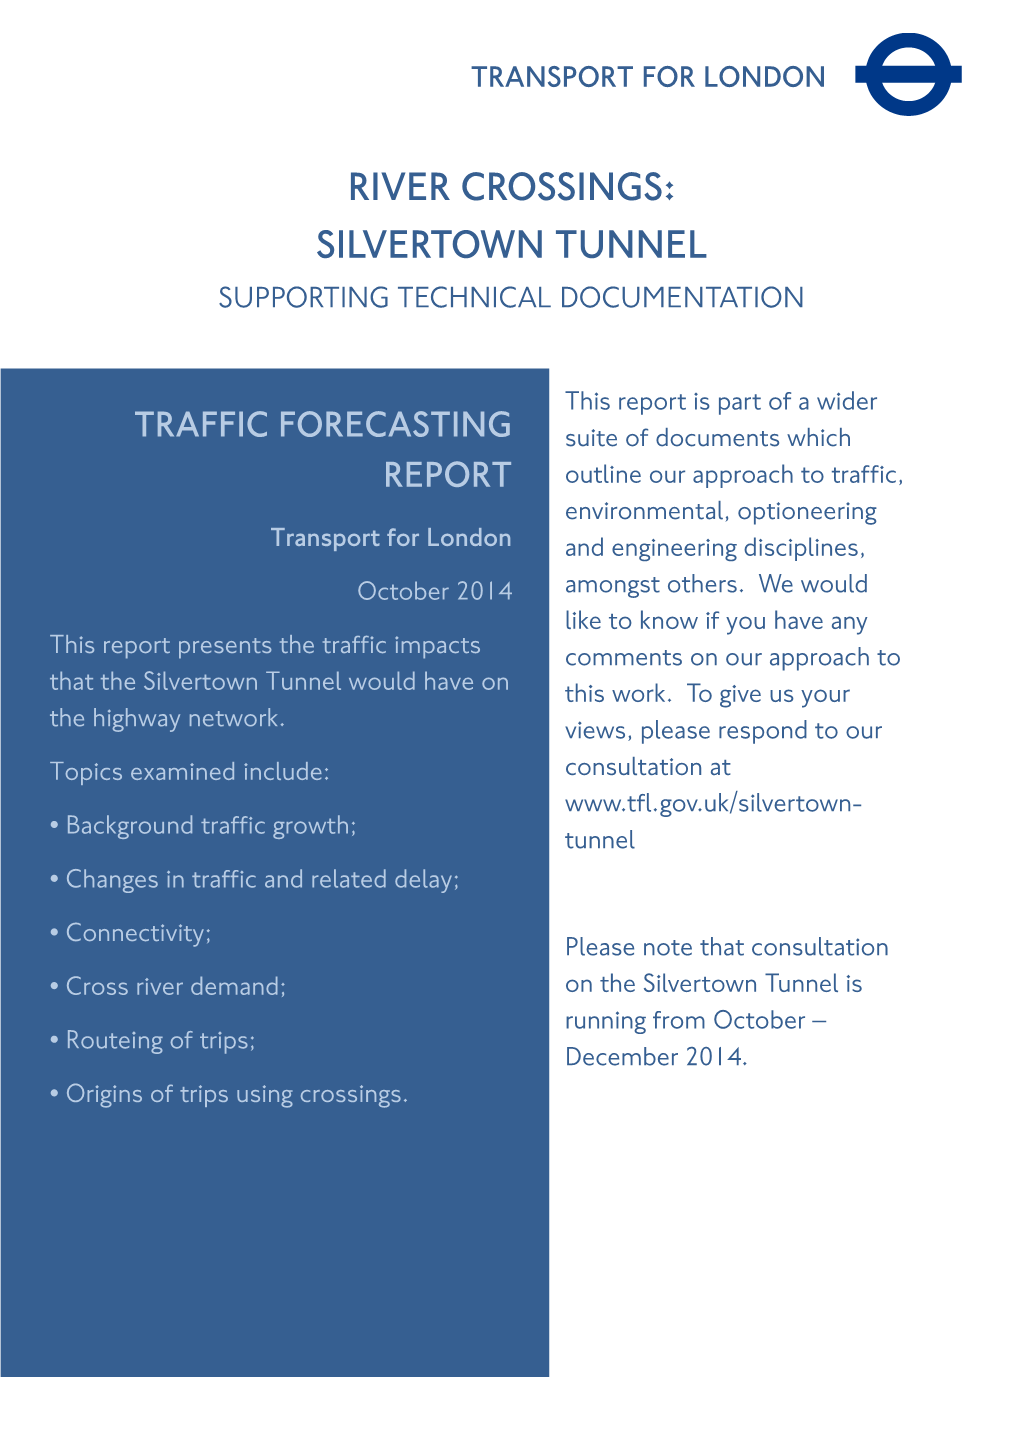 Traffic Forecasting Report This Report Presents the Traffic Impacts That the Silvertown Tunnel Would Have on the Highway Network